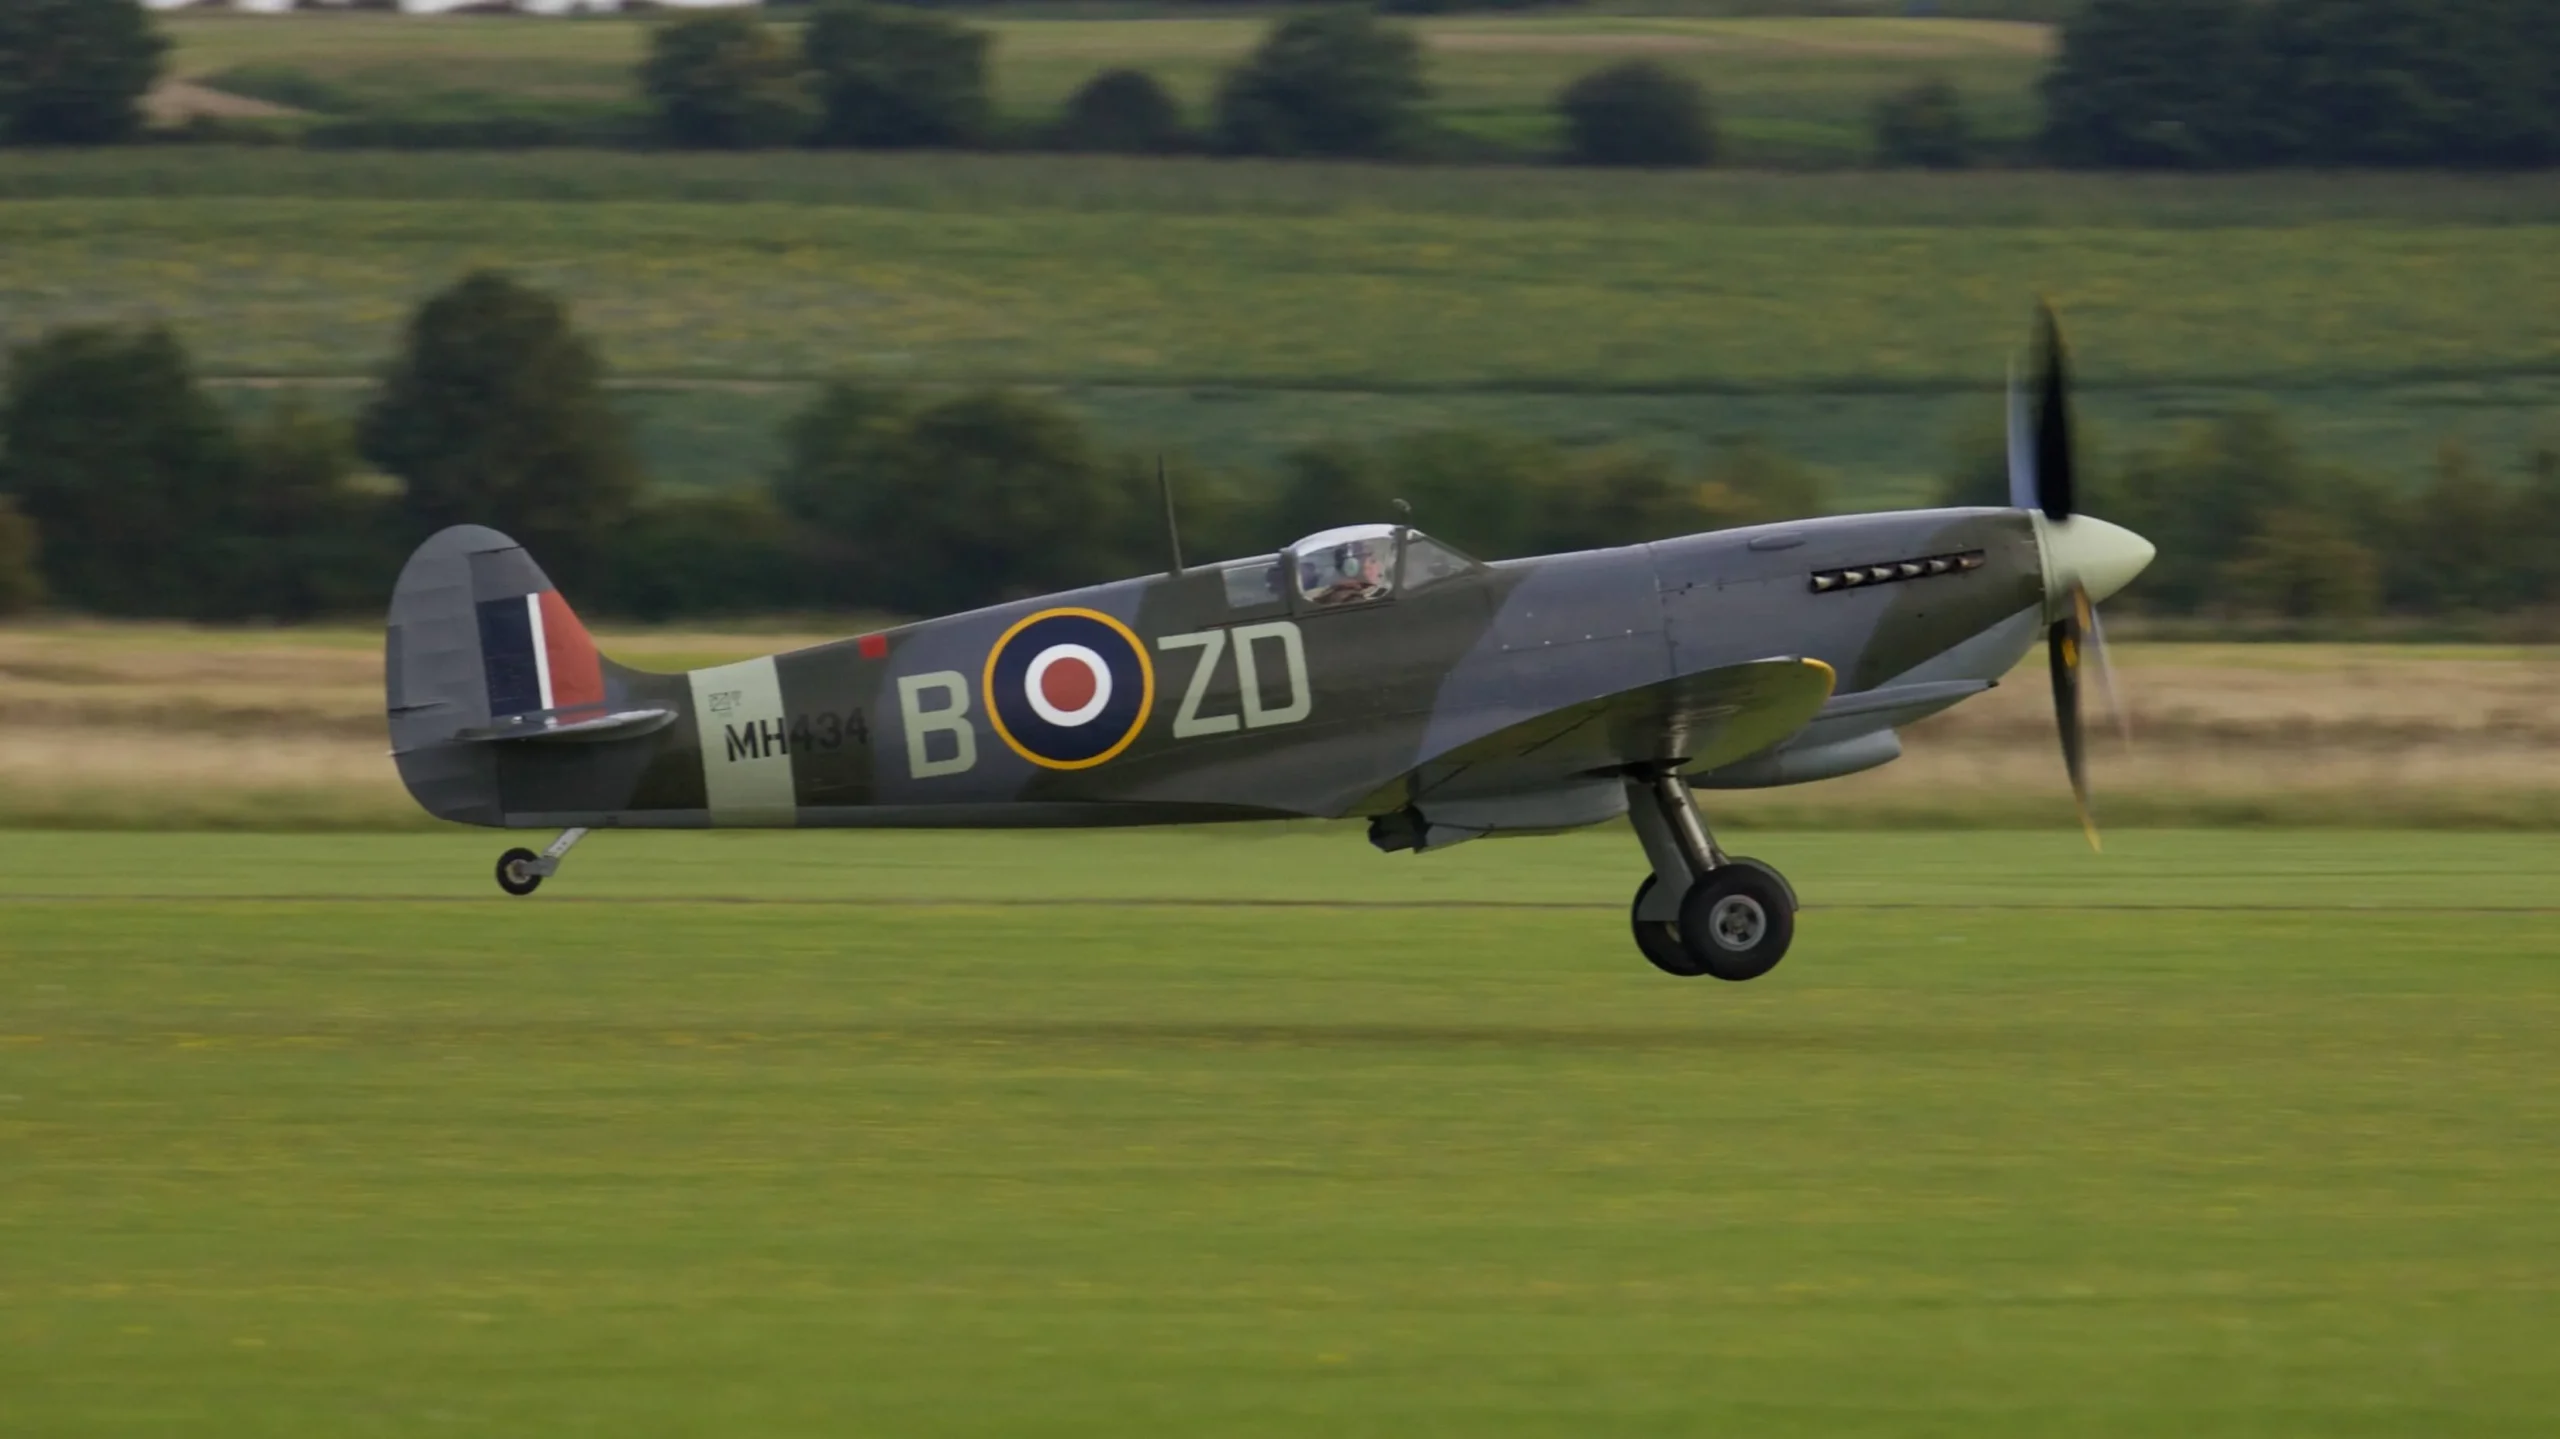 Which of these aircraft is the Supermarine Spitfire?